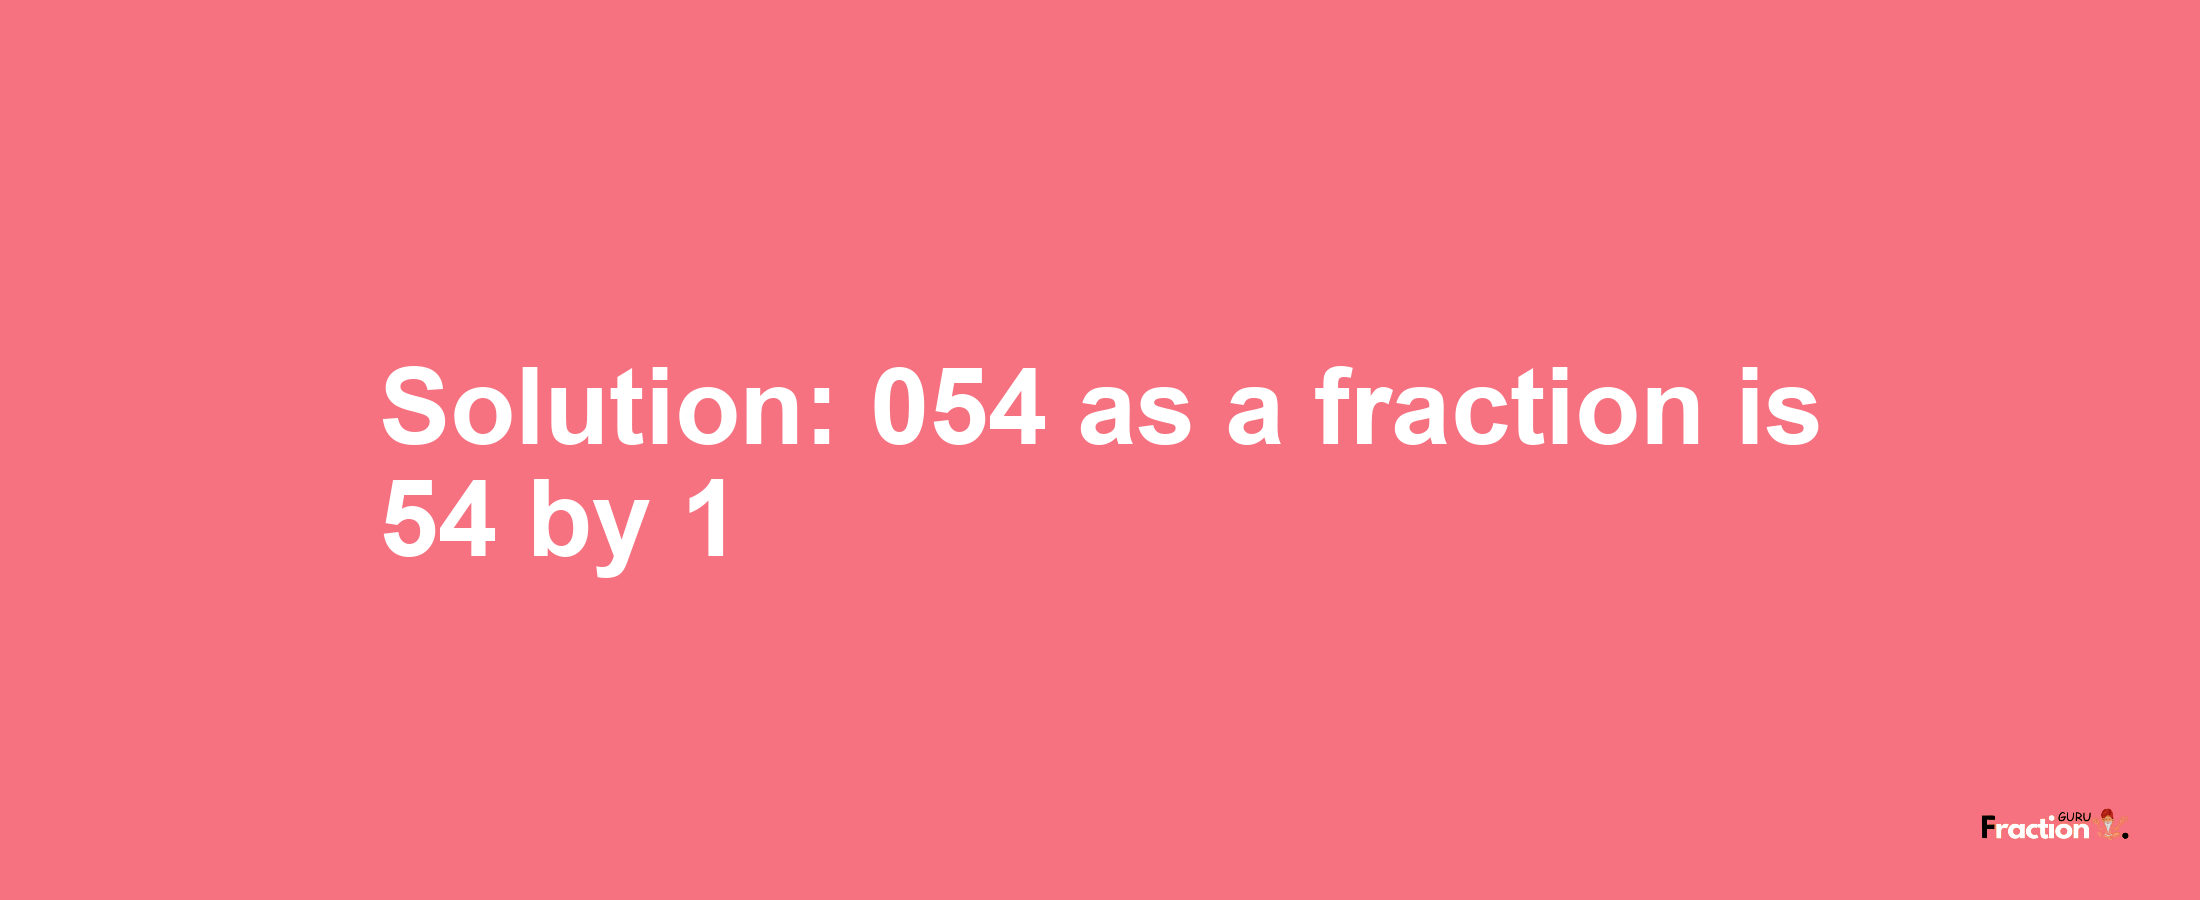 Solution:054 as a fraction is 54/1